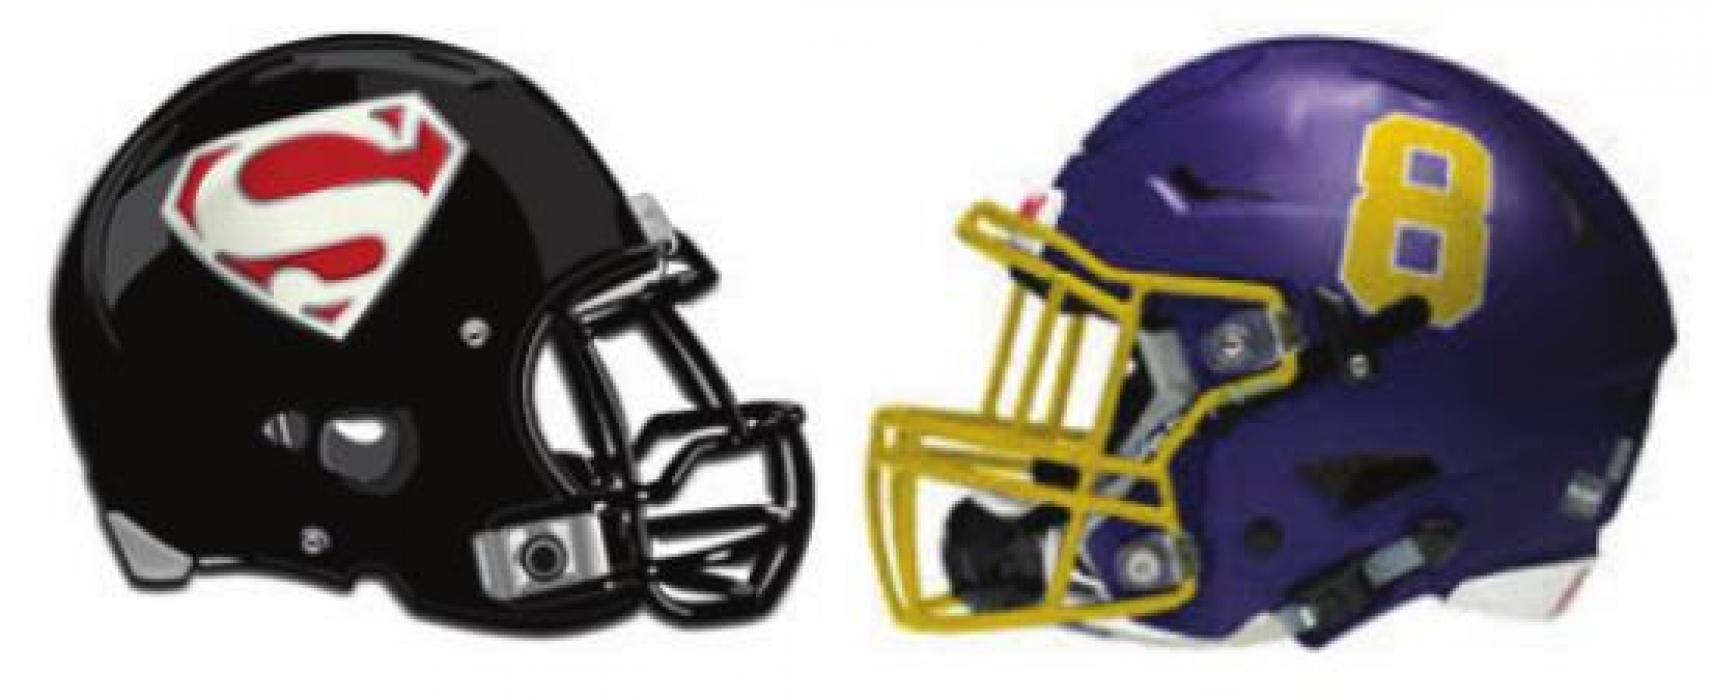 Friday Football Preview